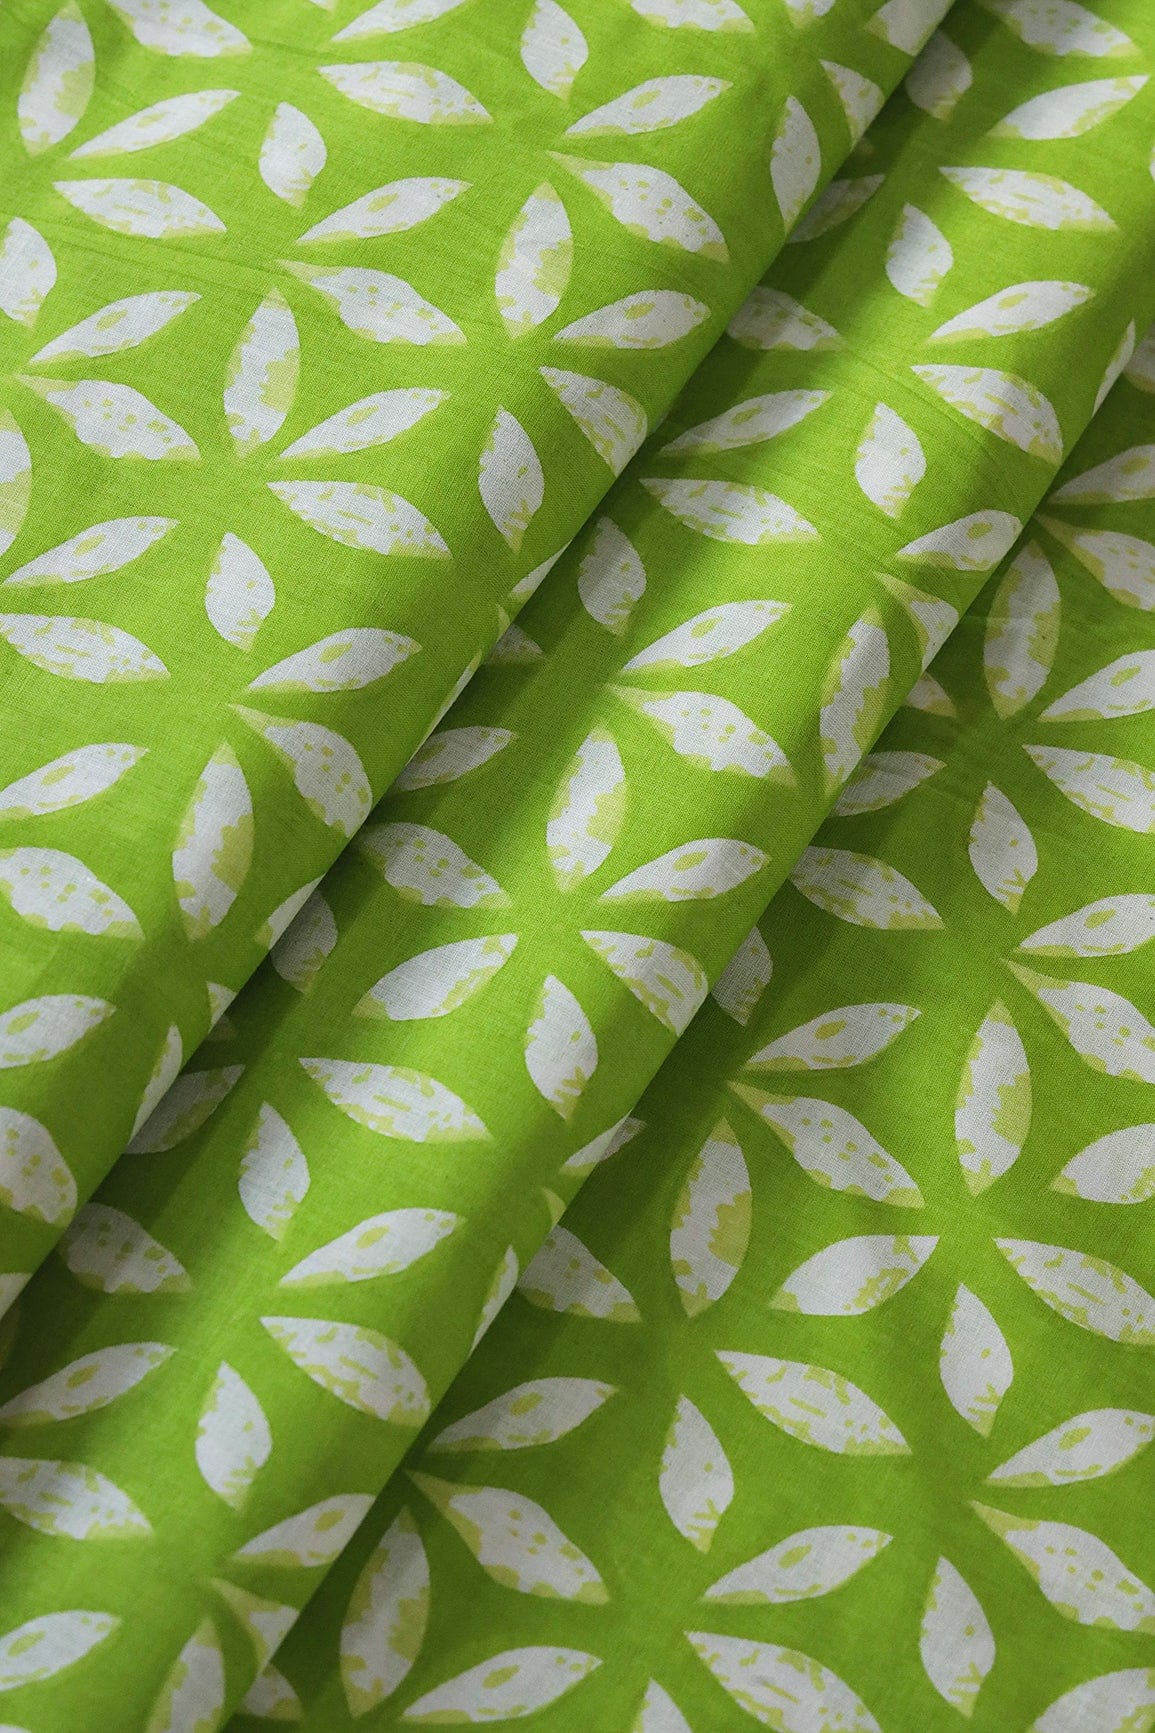 doeraa Prints Parrot Green And White Leafy pattern Print On Pure Cotton Fabric